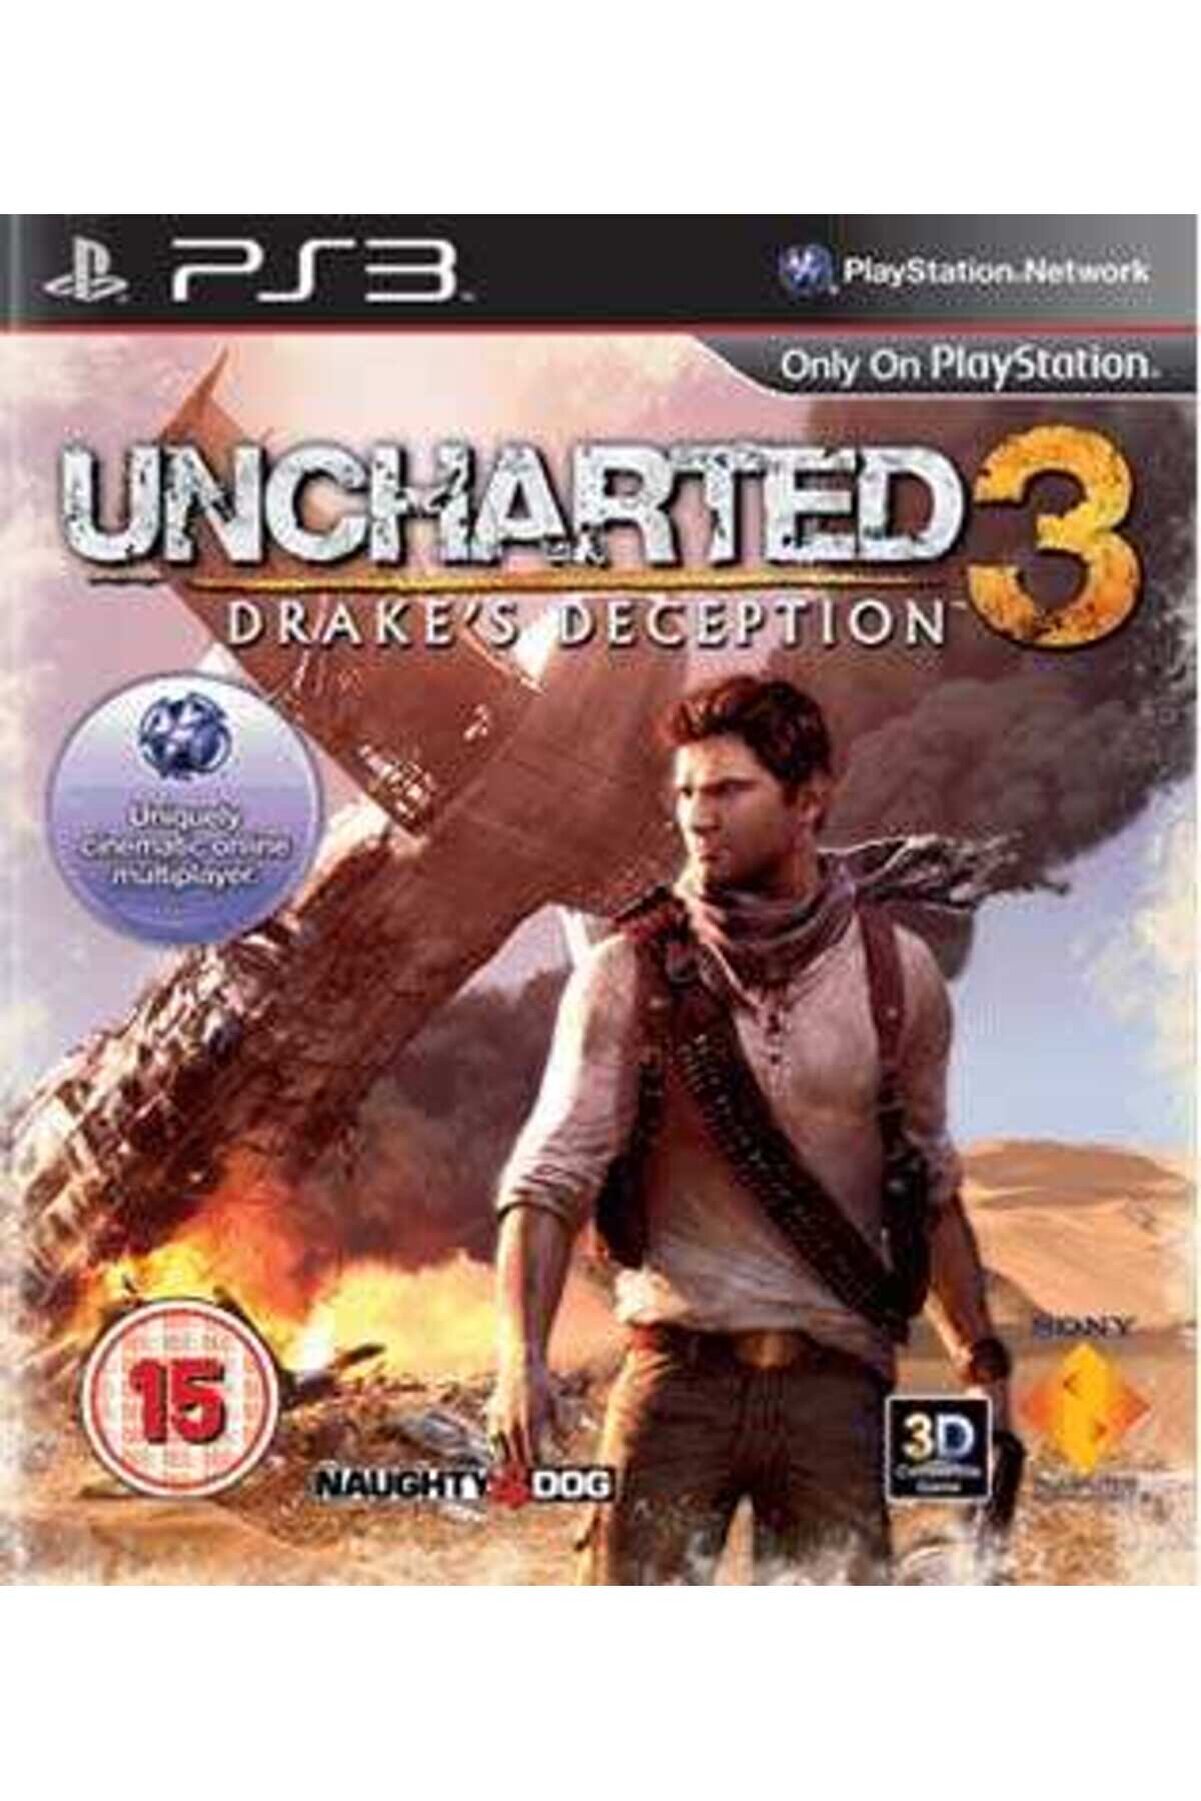 Sony Ps3 Uncharted 3 Drake's Deception